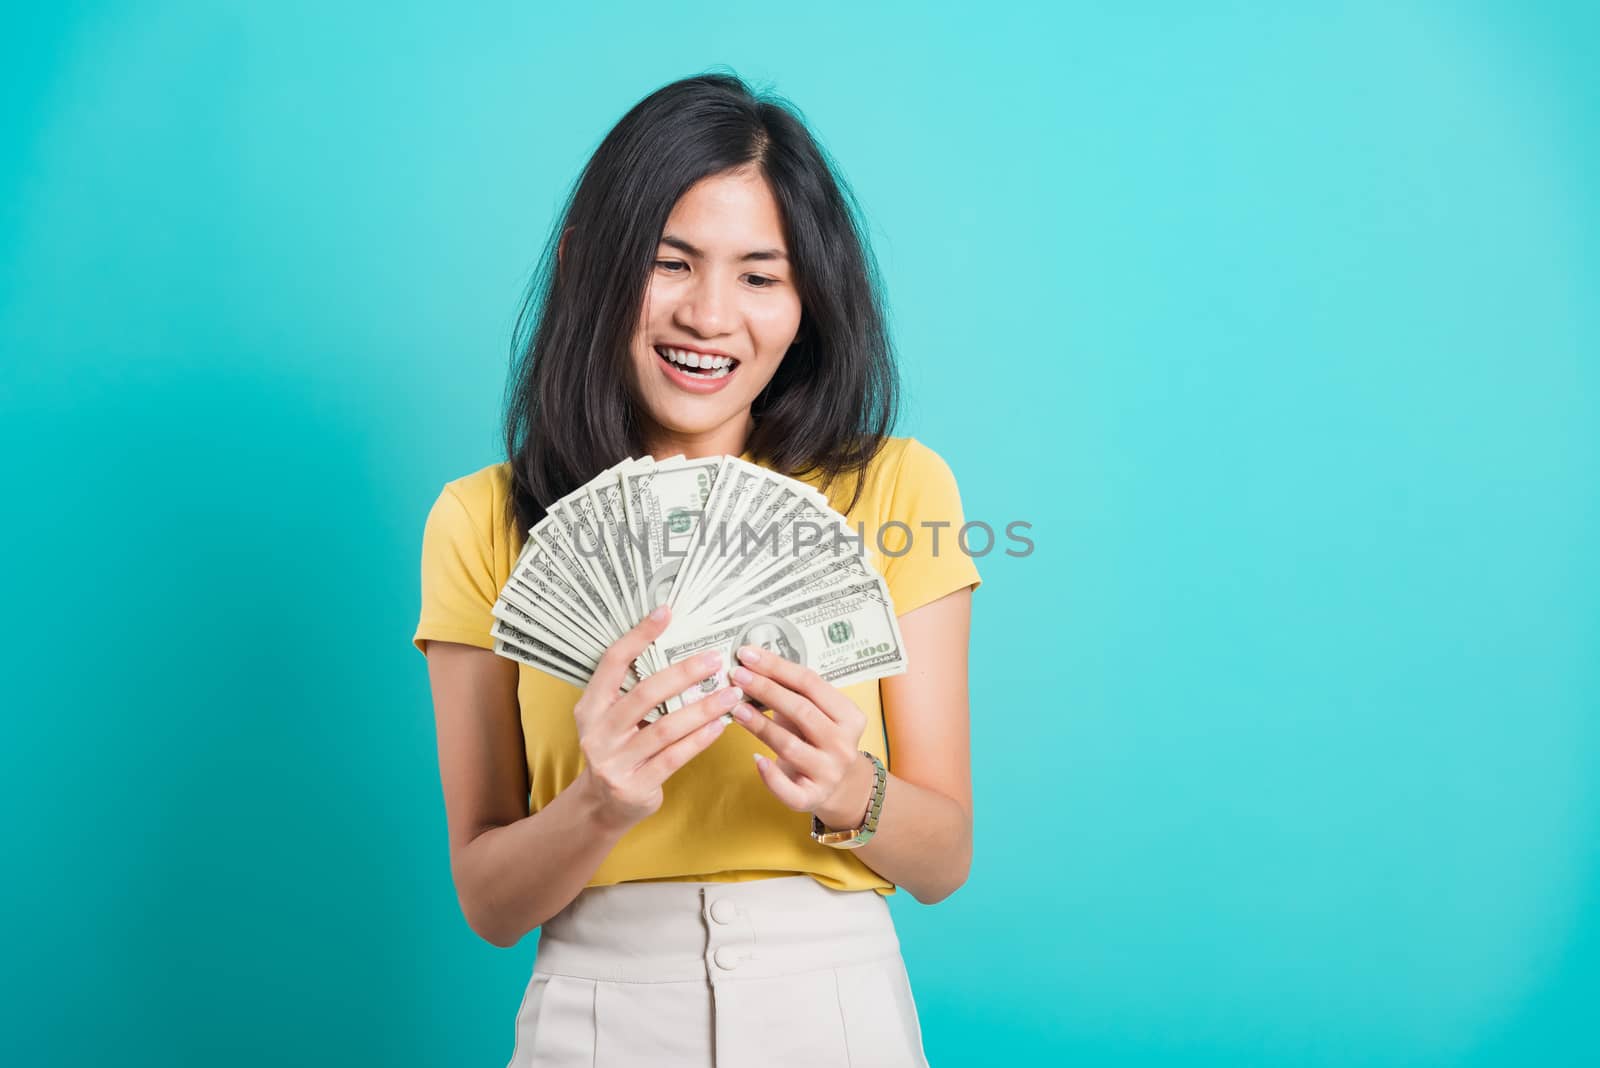 Asian happy portrait beautiful young woman standing wear t-shirt smiling holding money fan banknotes 100 dollar bills and looking to money isolated on blue background with copy space for text